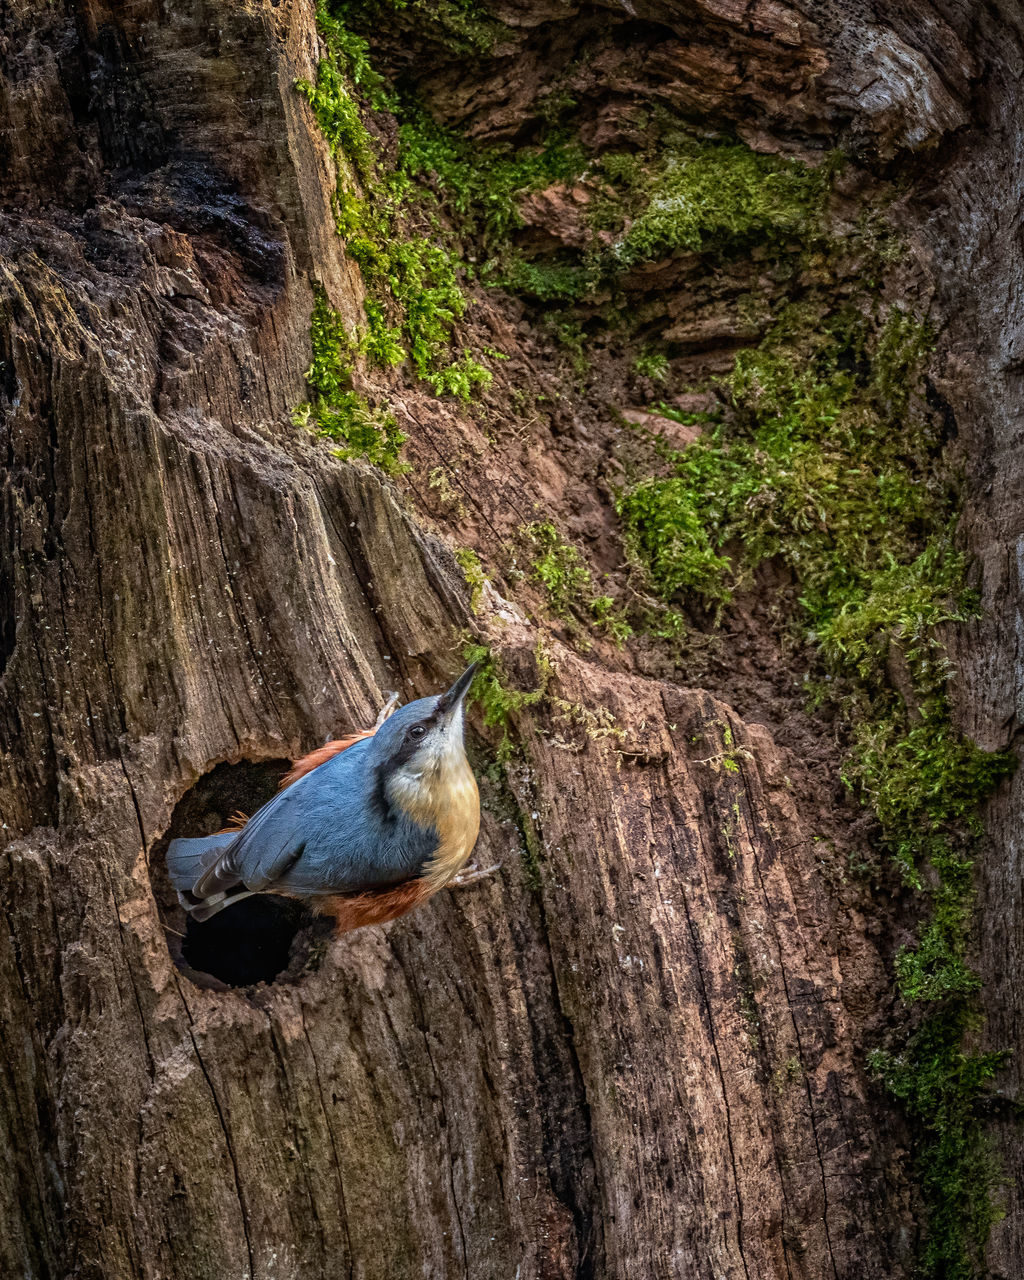 nature, animal themes, animal, animal wildlife, wildlife, one animal, bird, rock, tree, no people, plant, day, tree trunk, trunk, beauty in nature, wilderness, outdoors, leaf, perching, green, textured, land